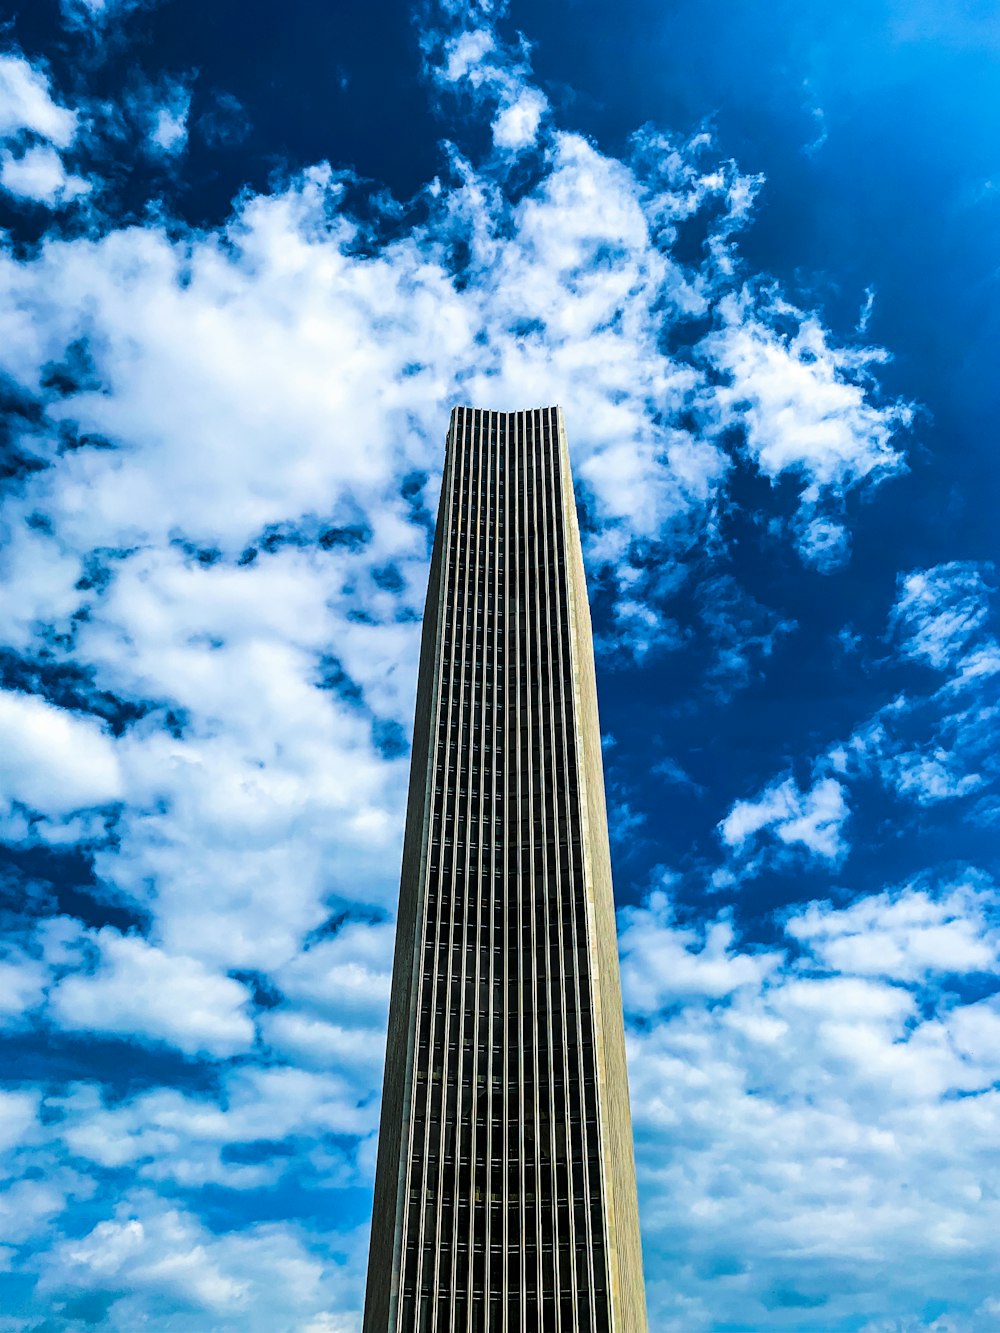 white high-rise building under white and blue cloudy skies